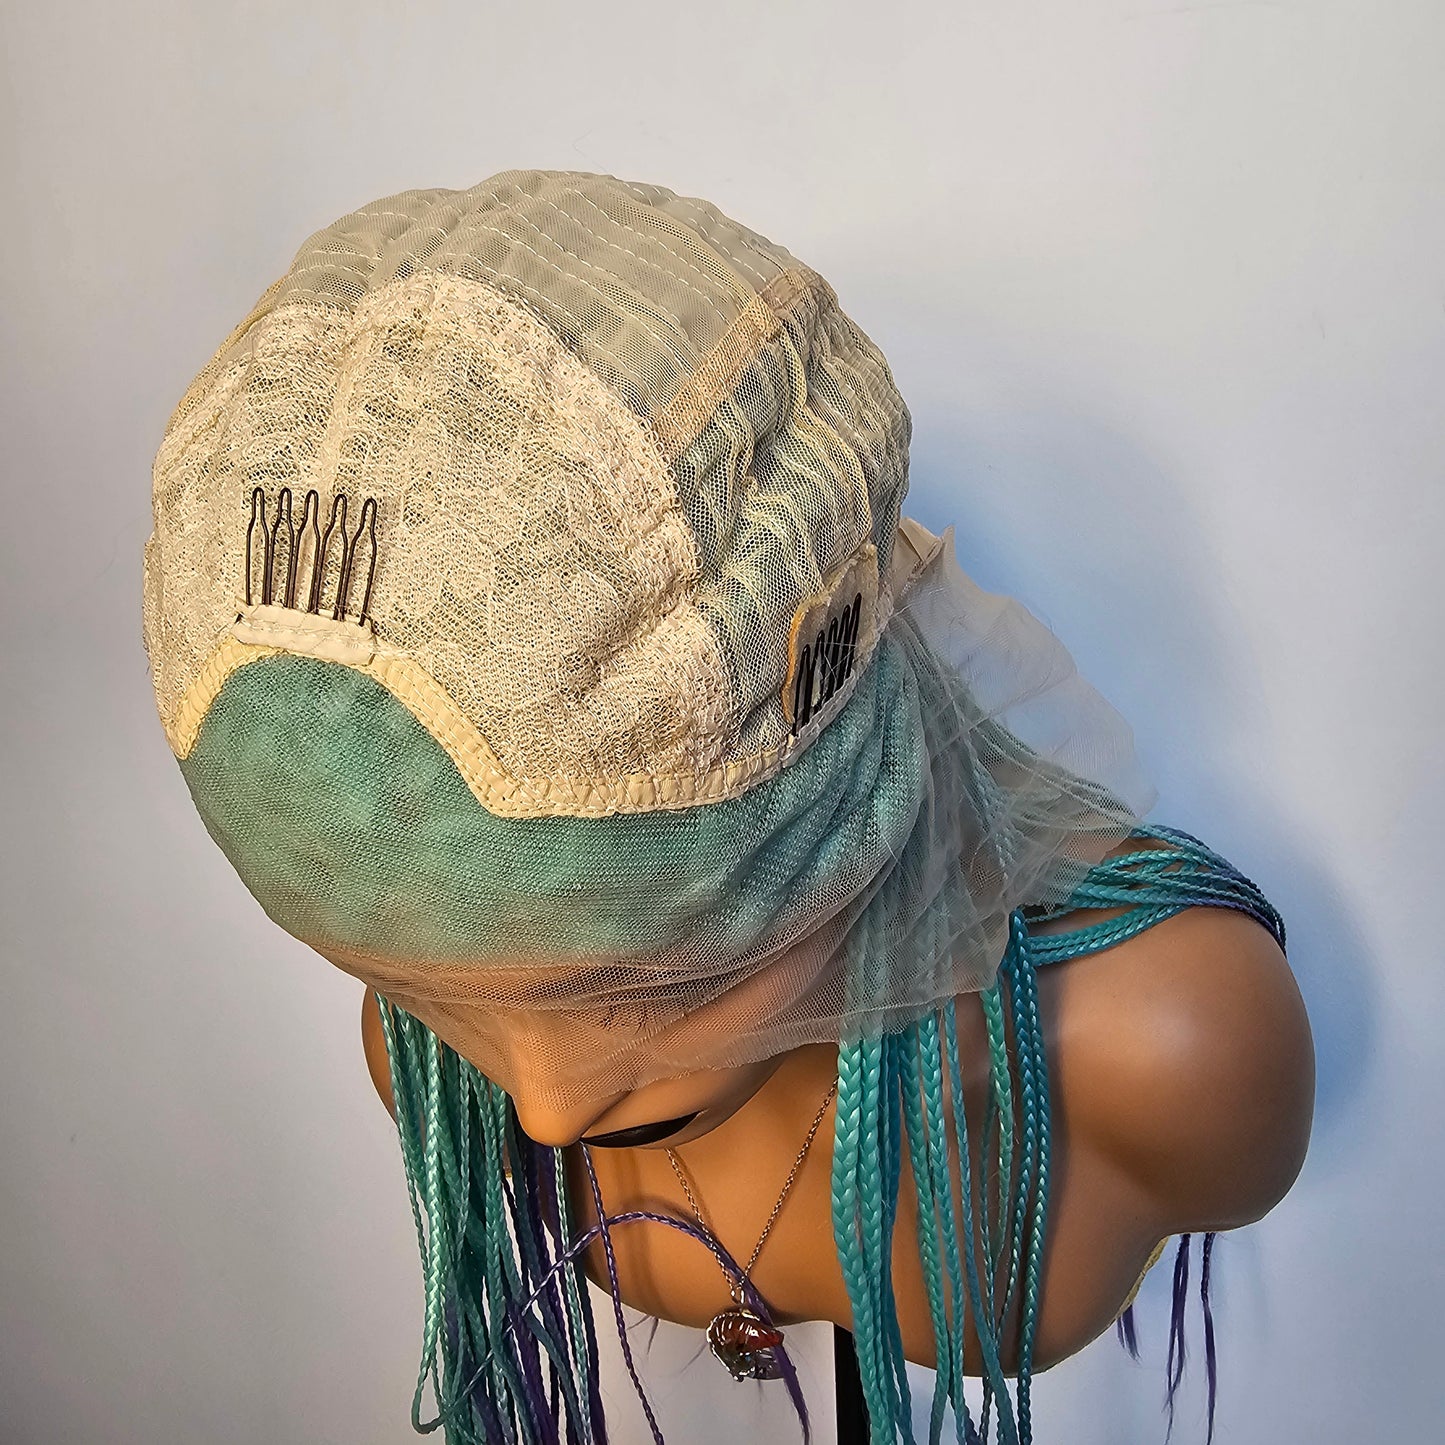 Turquoise and purple braided lace front wig